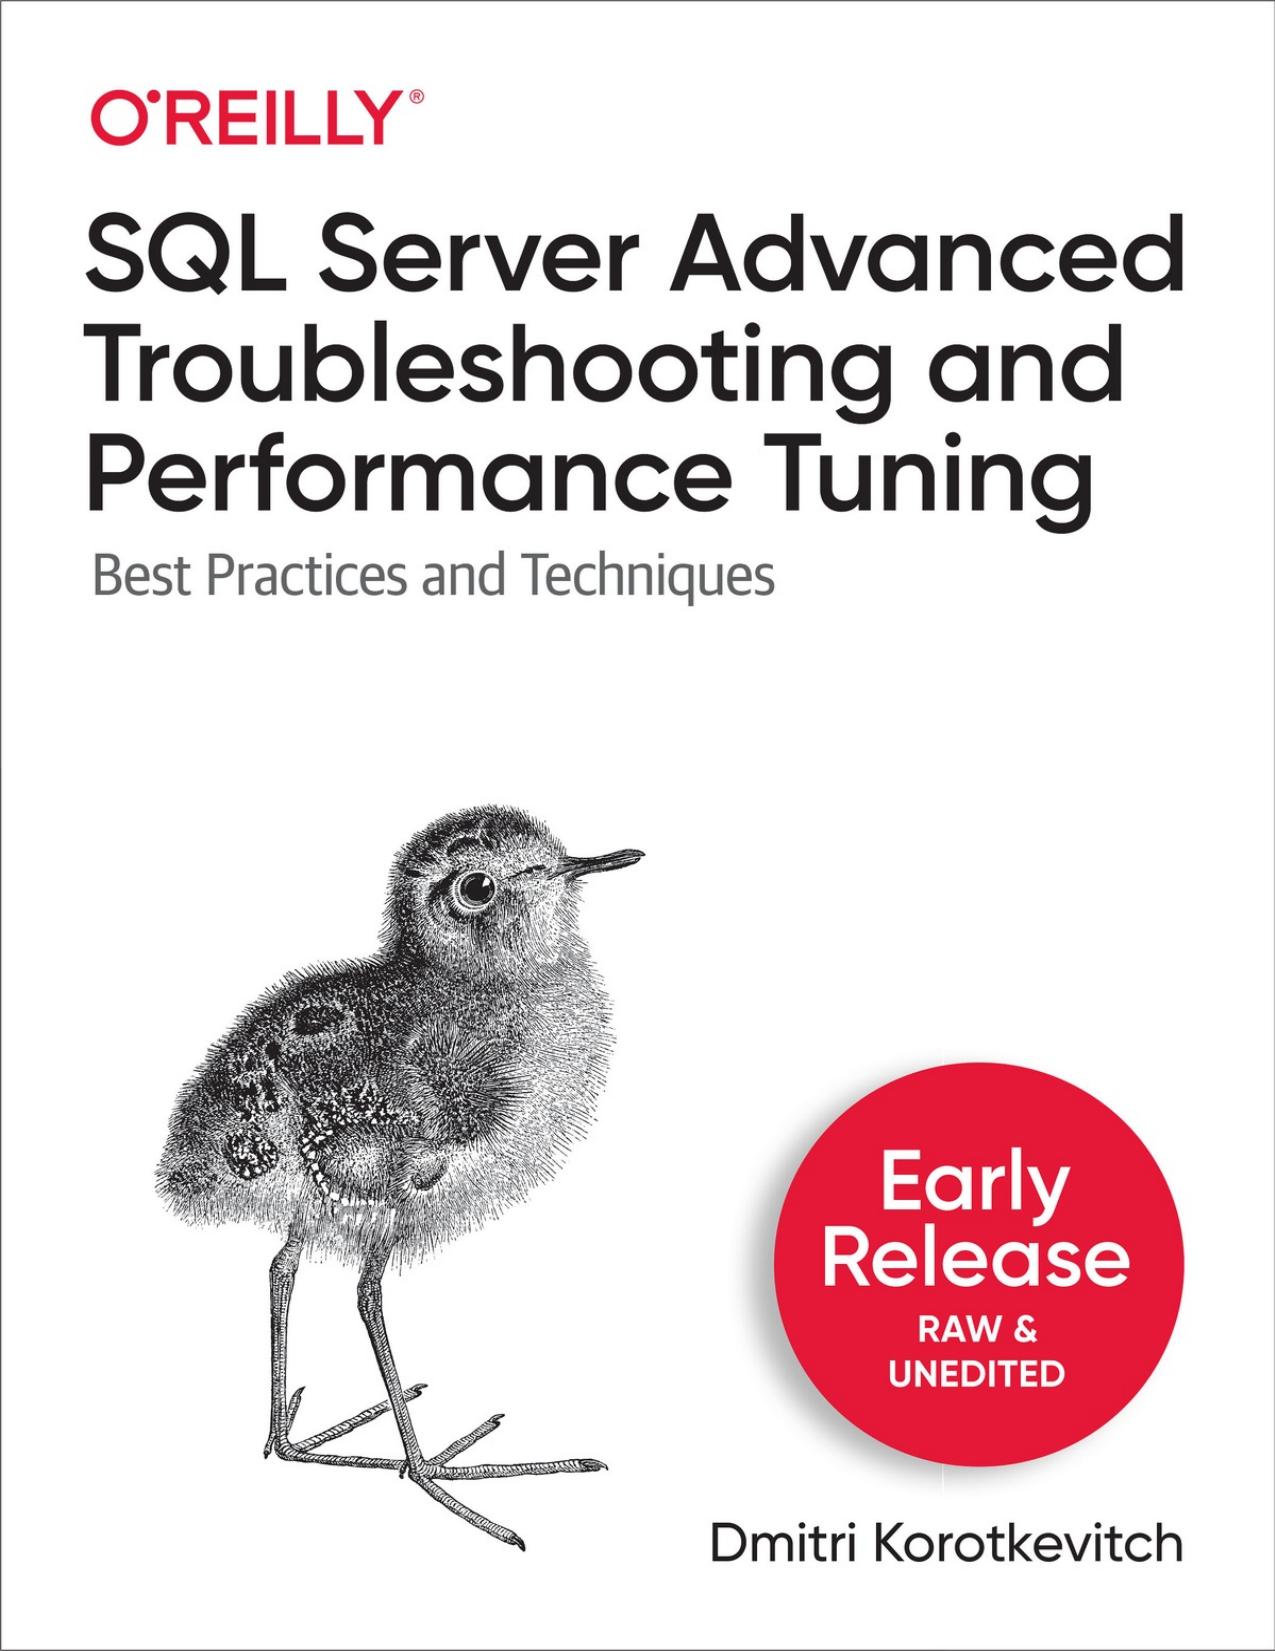 SQL Server Advanced Troubleshooting and Performance Tuning by Dmitri Korotkevitch